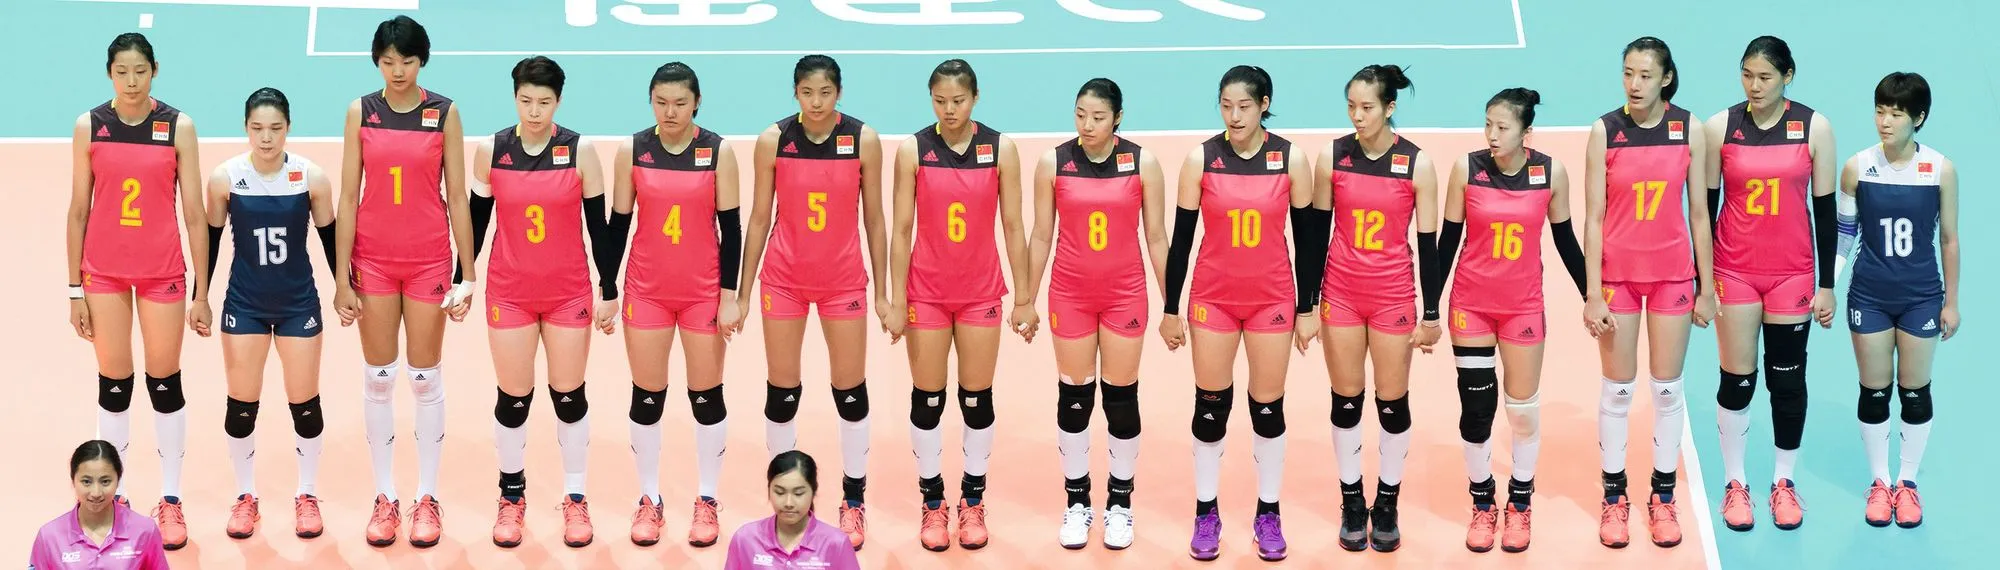 Équipe de Volley Chinoise